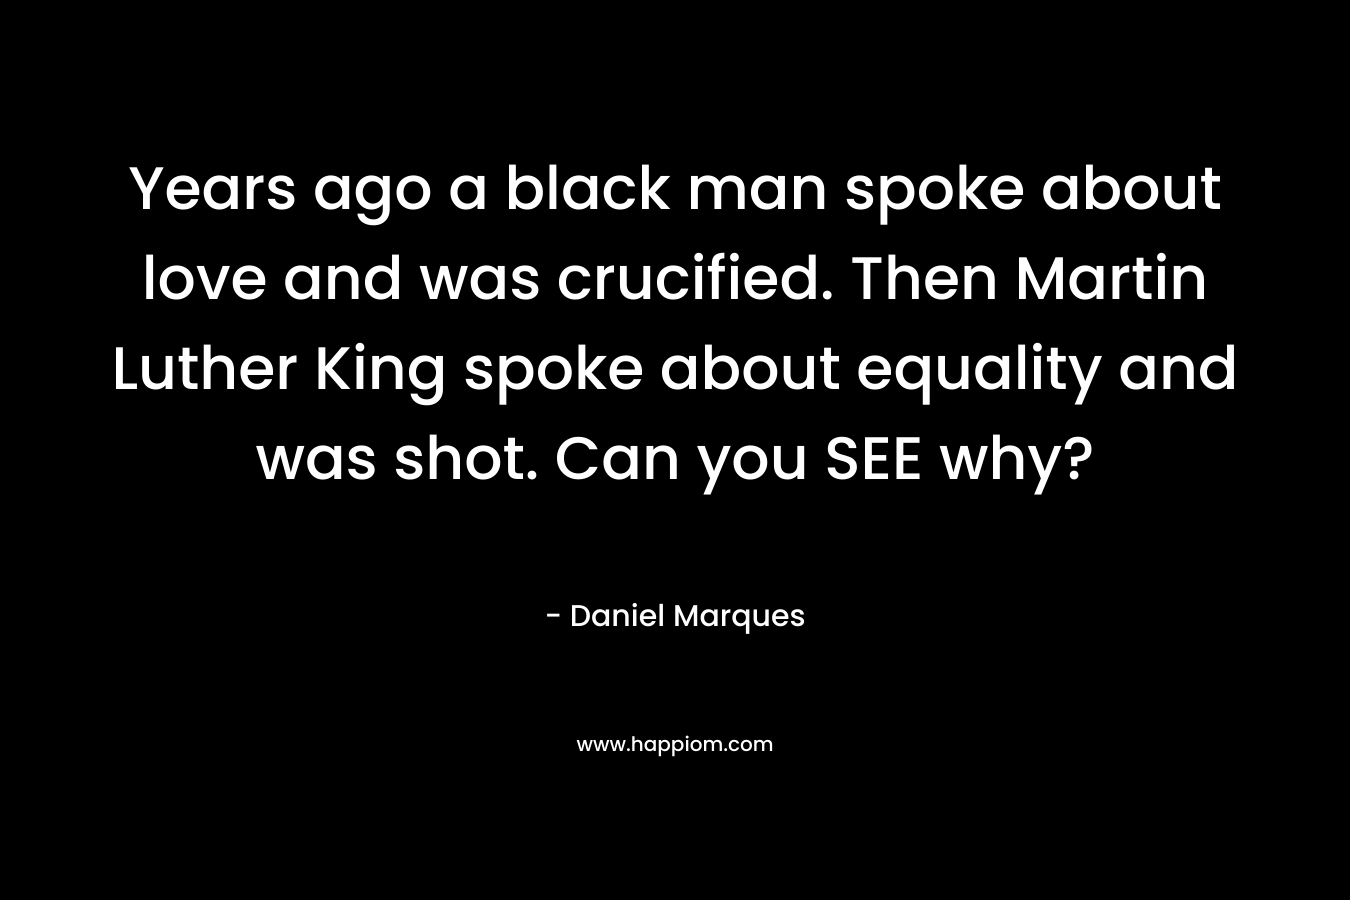 Years ago a black man spoke about love and was crucified. Then Martin Luther King spoke about equality and was shot. Can you SEE why?